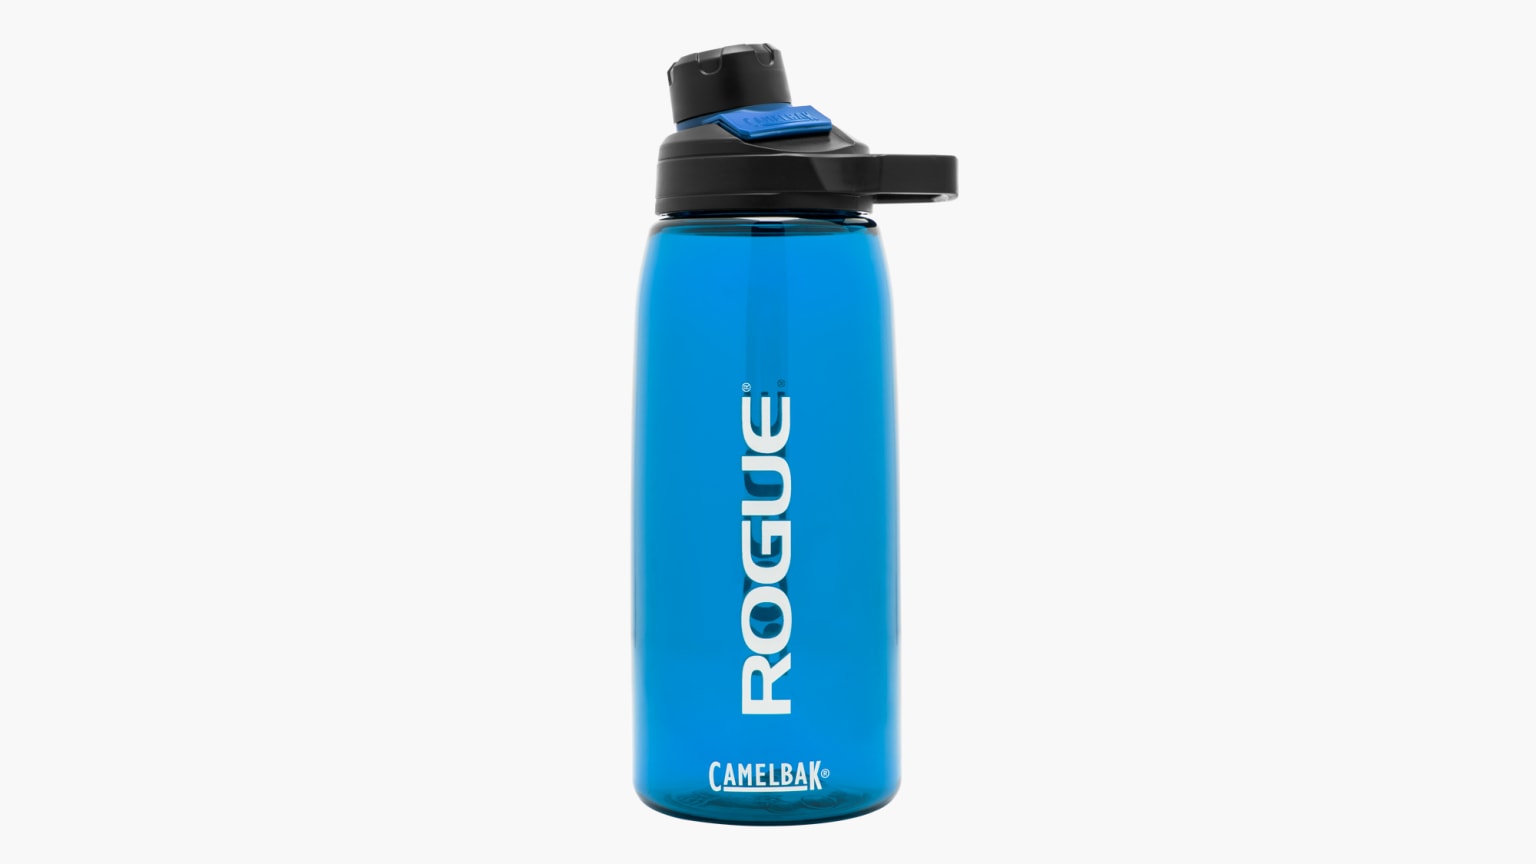 https://assets.roguefitness.com/f_auto,q_auto,c_limit,w_1536,b_rgb:f8f8f8/catalog/Gear%20and%20Accessories/Accessories/Shakers%20and%20Bottles/CB0017/CB0017-H_w4nmlm.png